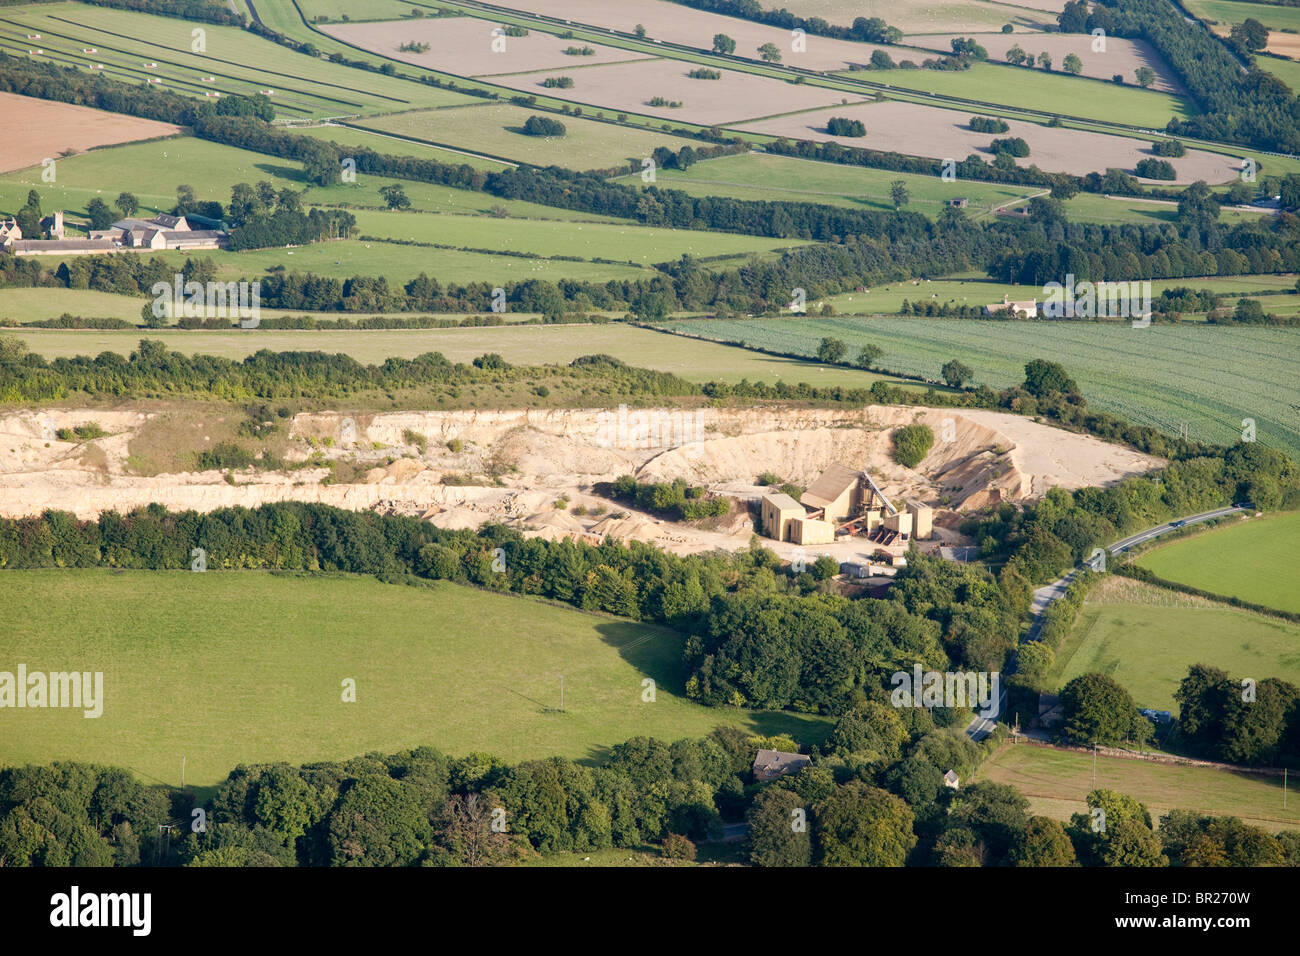 An aerial view of Coscombe Quarry from the west with the Cotswold village of Cutsdean, Gloucestershire visible in the background Stock Photo